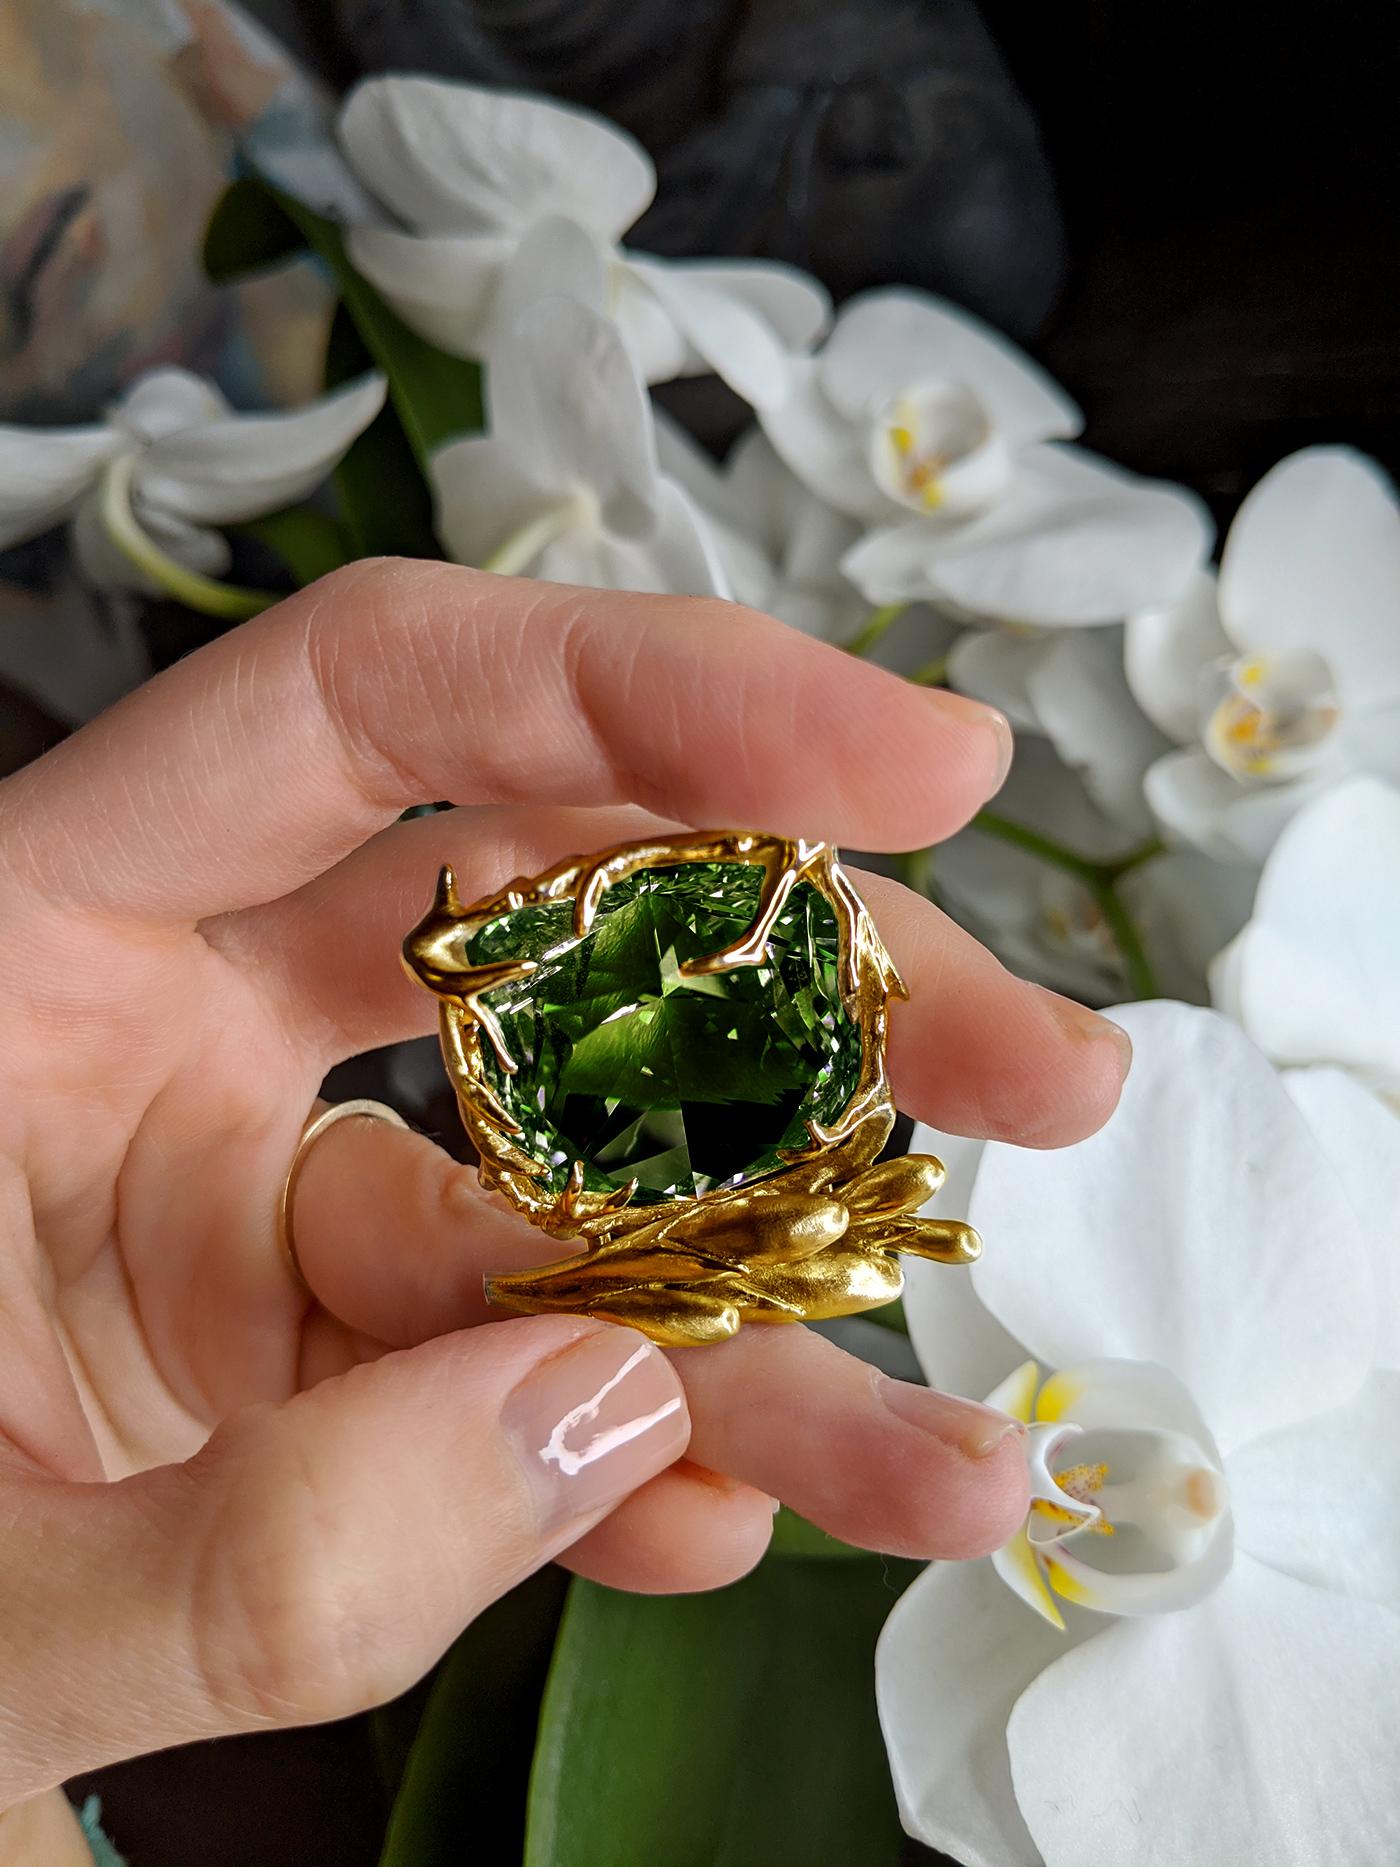 The center of this Fairy Tale ring is a beautiful grown emerald set in 18 karat yellow gold. The length of the piece is 2.7 cm, and it is designed by the talented oil painter, Polya Medvedeva. Her mission is to create unique pieces that stand out